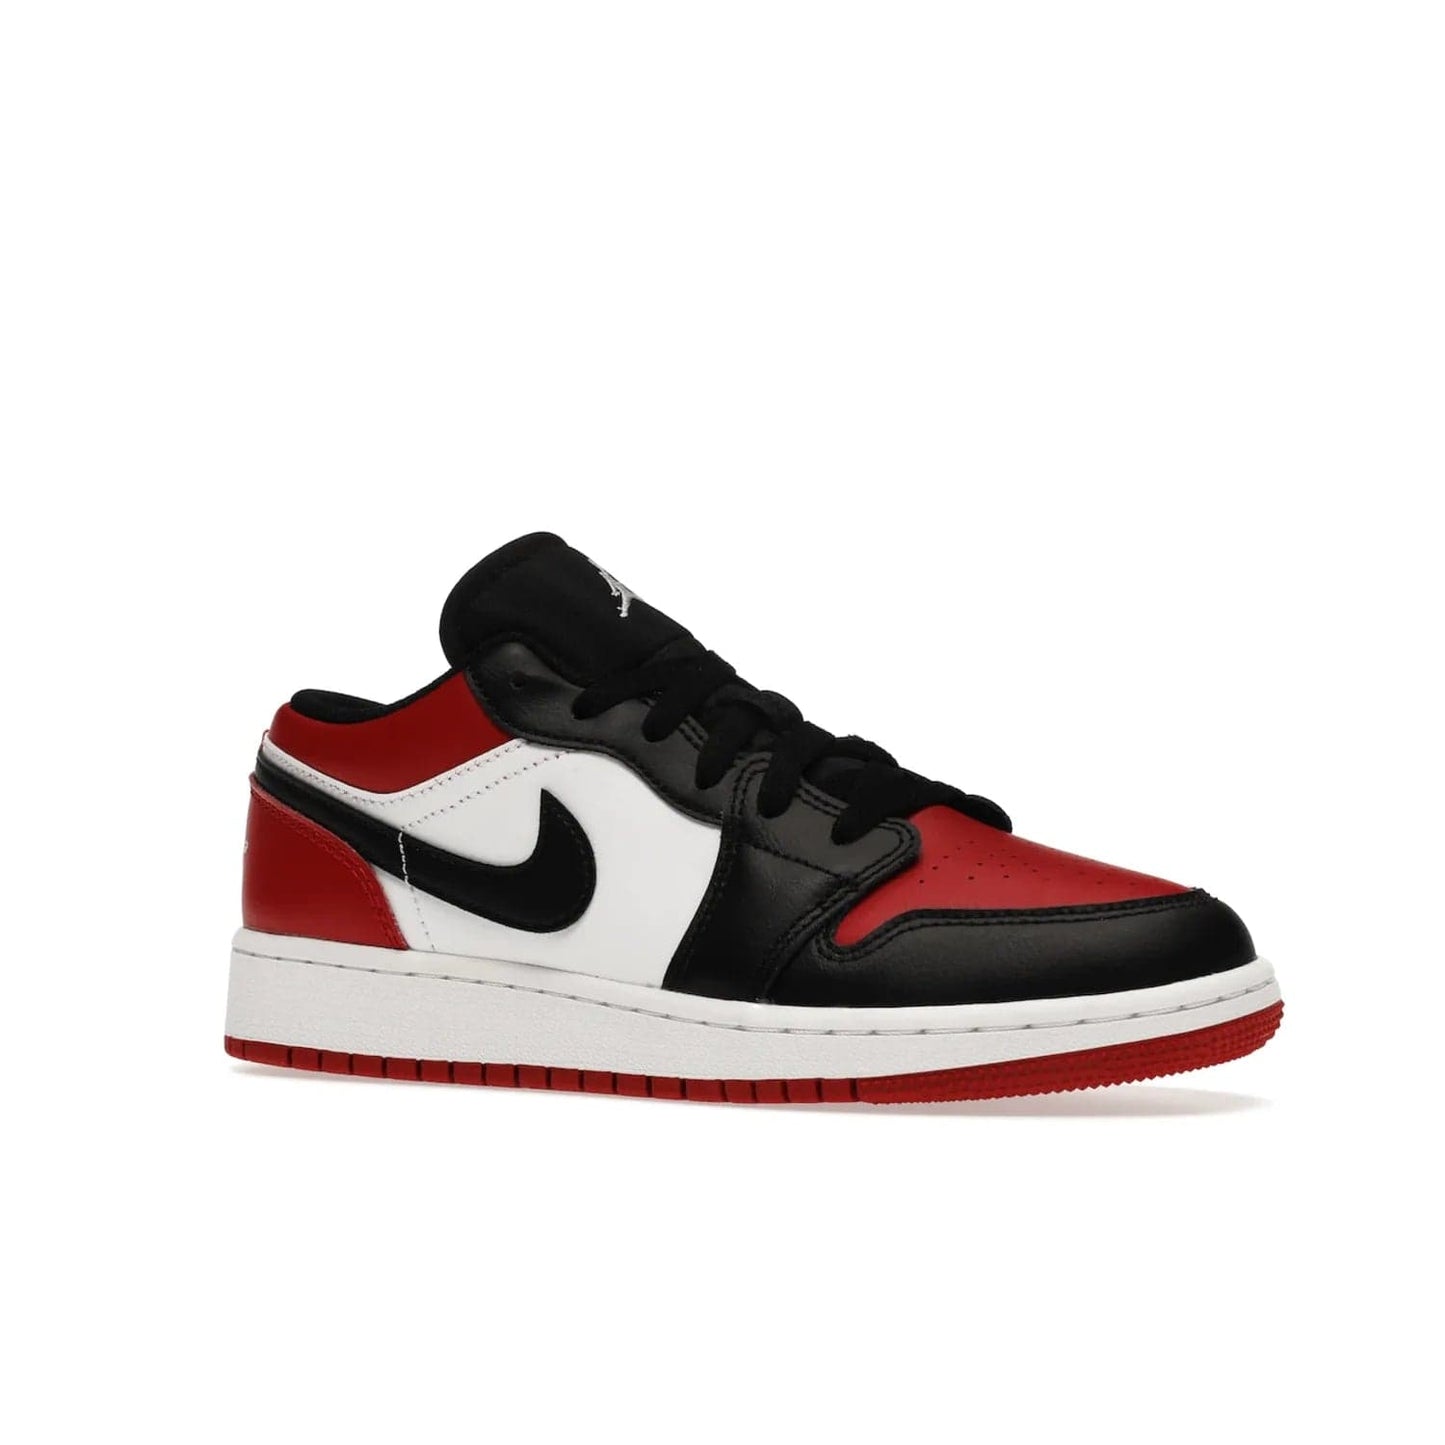 Jordan 1 Low Bred Toe (GS) - Image 4 - Only at www.BallersClubKickz.com - #
Iconic sneaker from Jordan brand with classic colorway, unique detailing & Air Jordan Wings logo. Step into the shoes of the greats with the Jordan 1 Low Bred Toe GS!